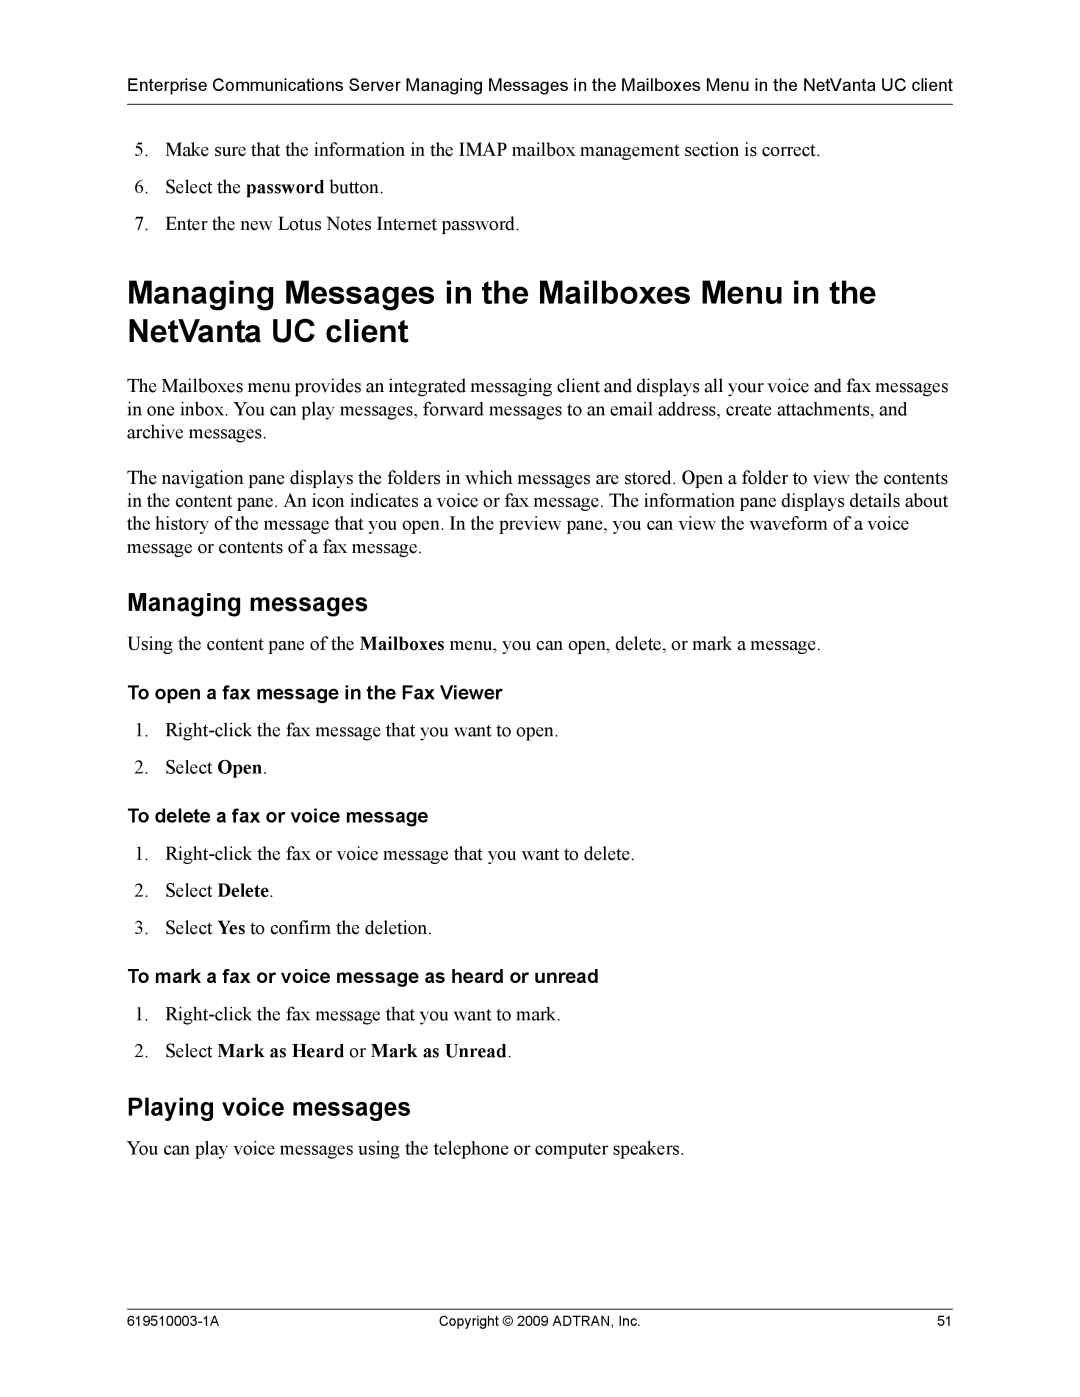 ADTRAN 619510003-1A manual Managing Messages in the Mailboxes Menu in the NetVanta UC client, Managing messages 